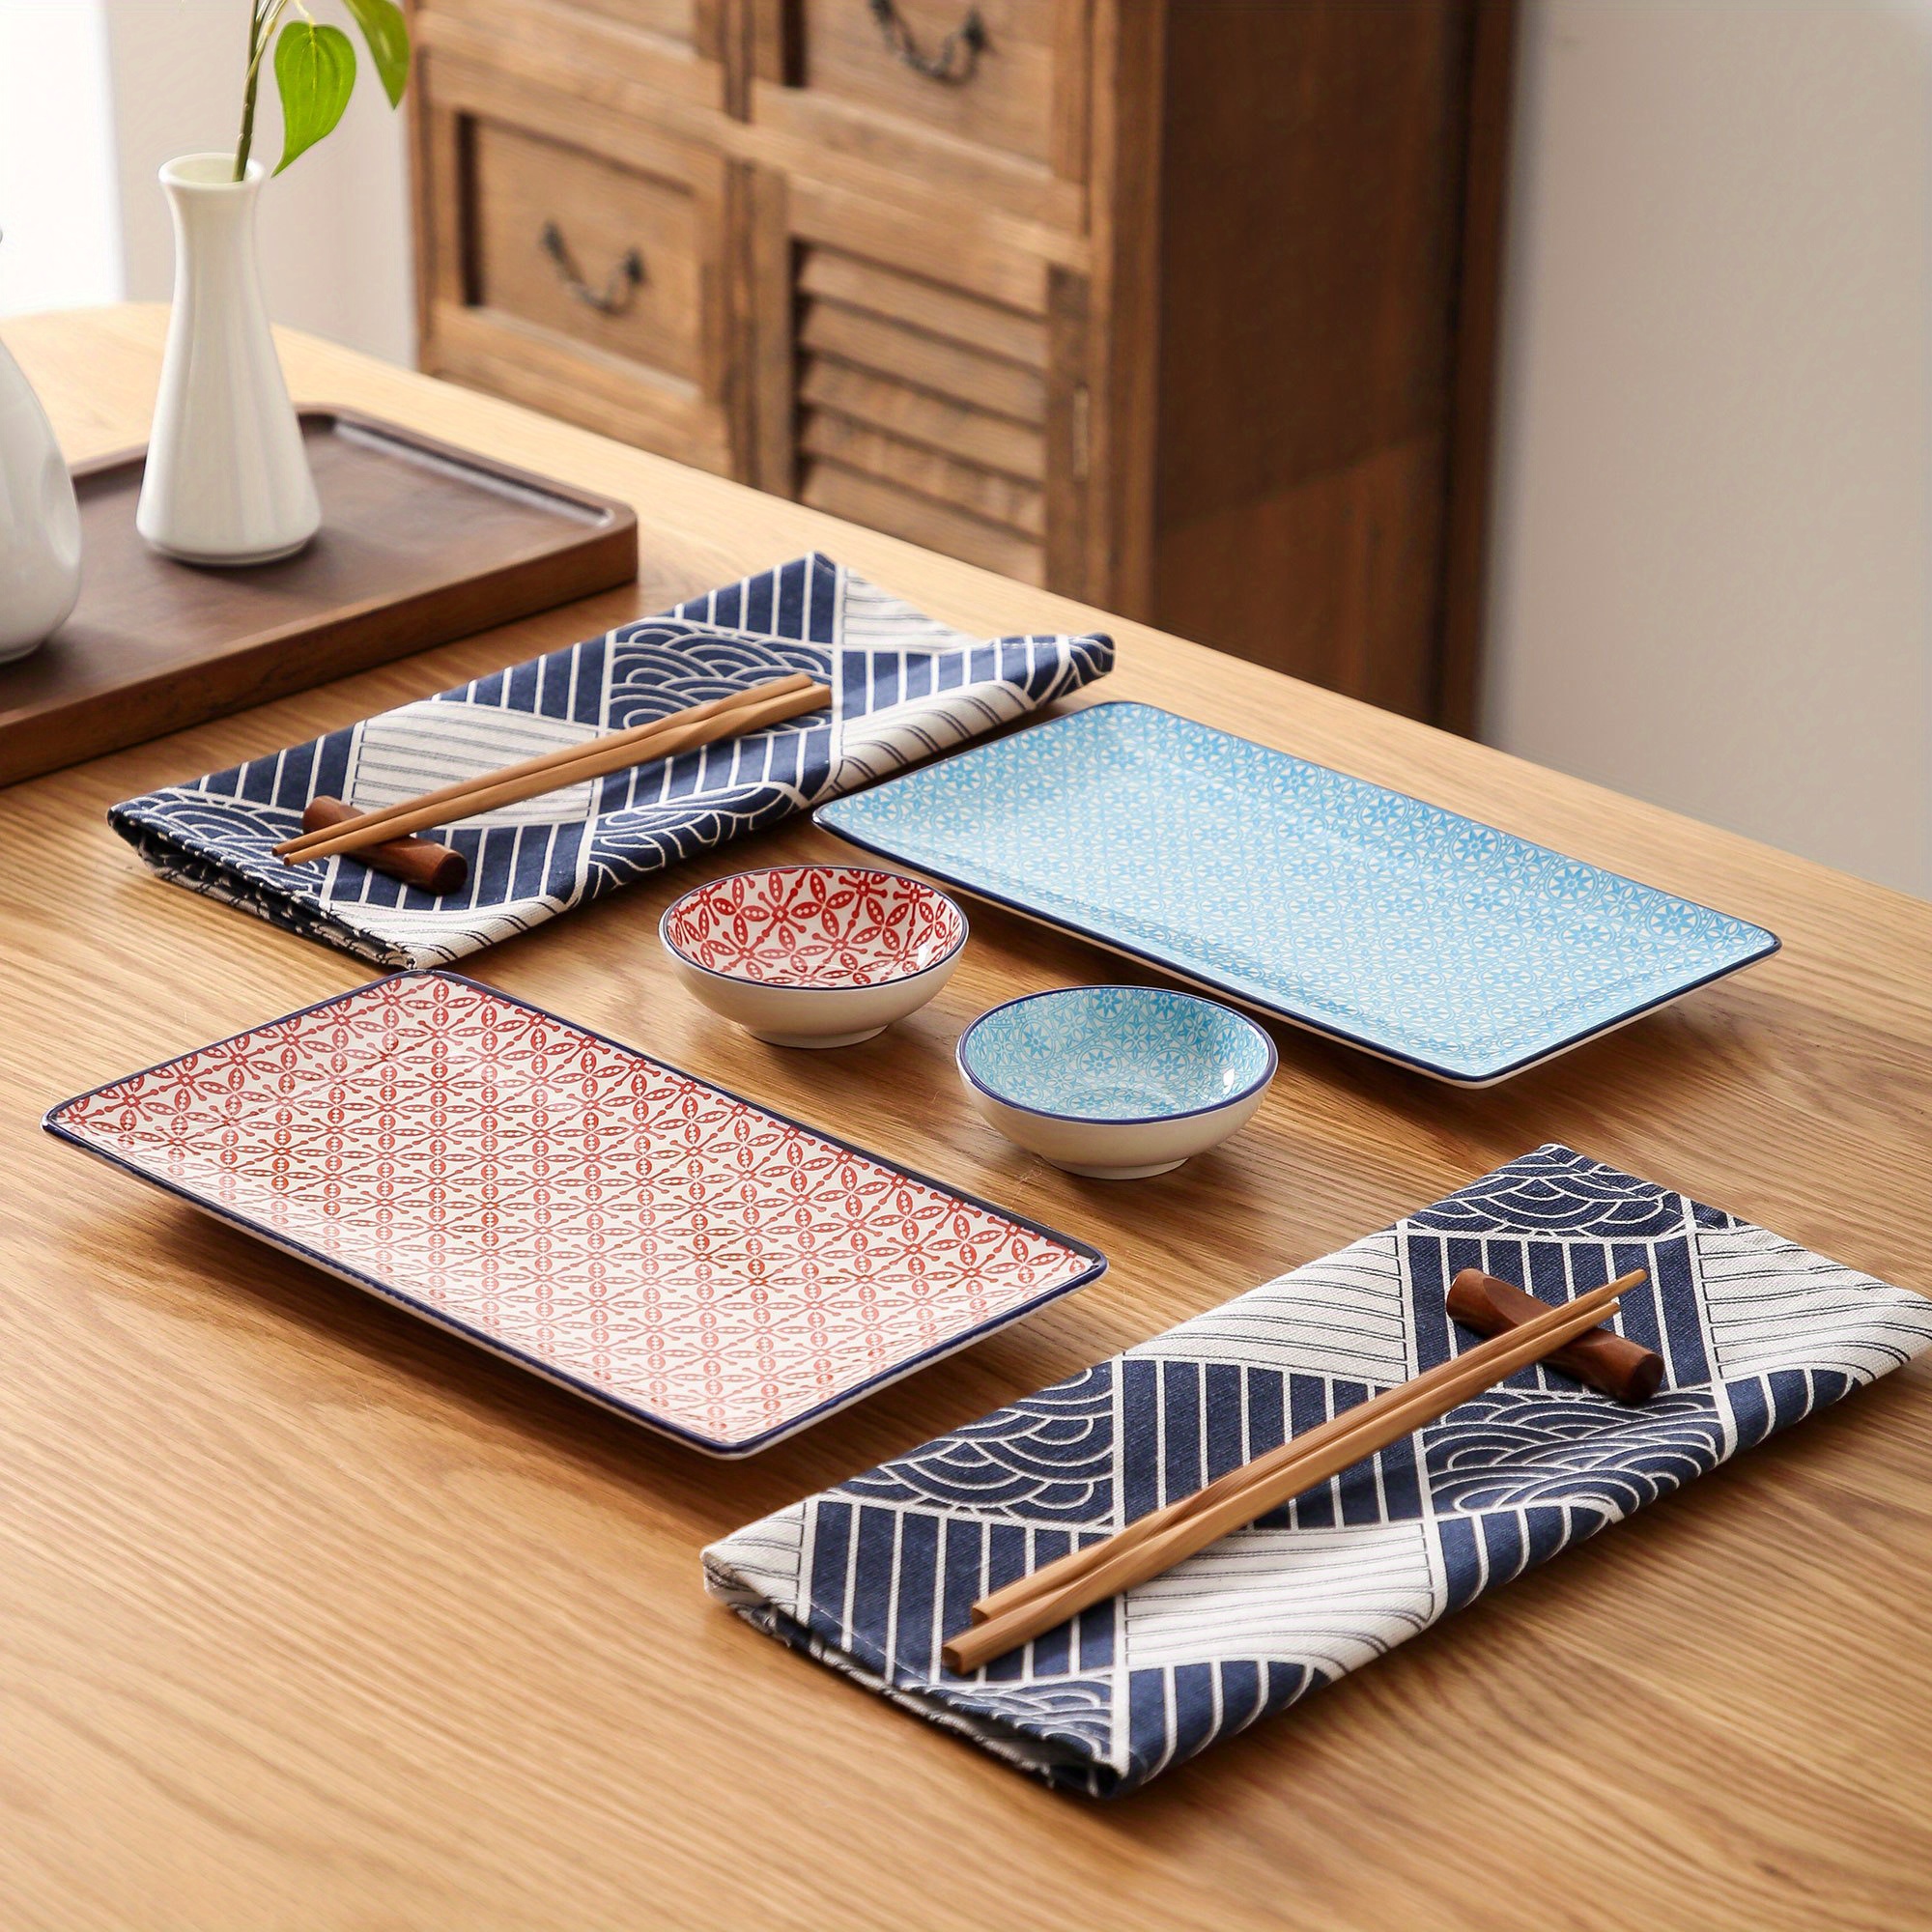 6 PCS Sushi Set Porcelain Japanese Style Hand-Painted Blue And Red, 2 Sushi  Plates, 2 Dip Bowls, 2 Pairs Of Chopsticks For Sushi, Kitchen Items, Kitch